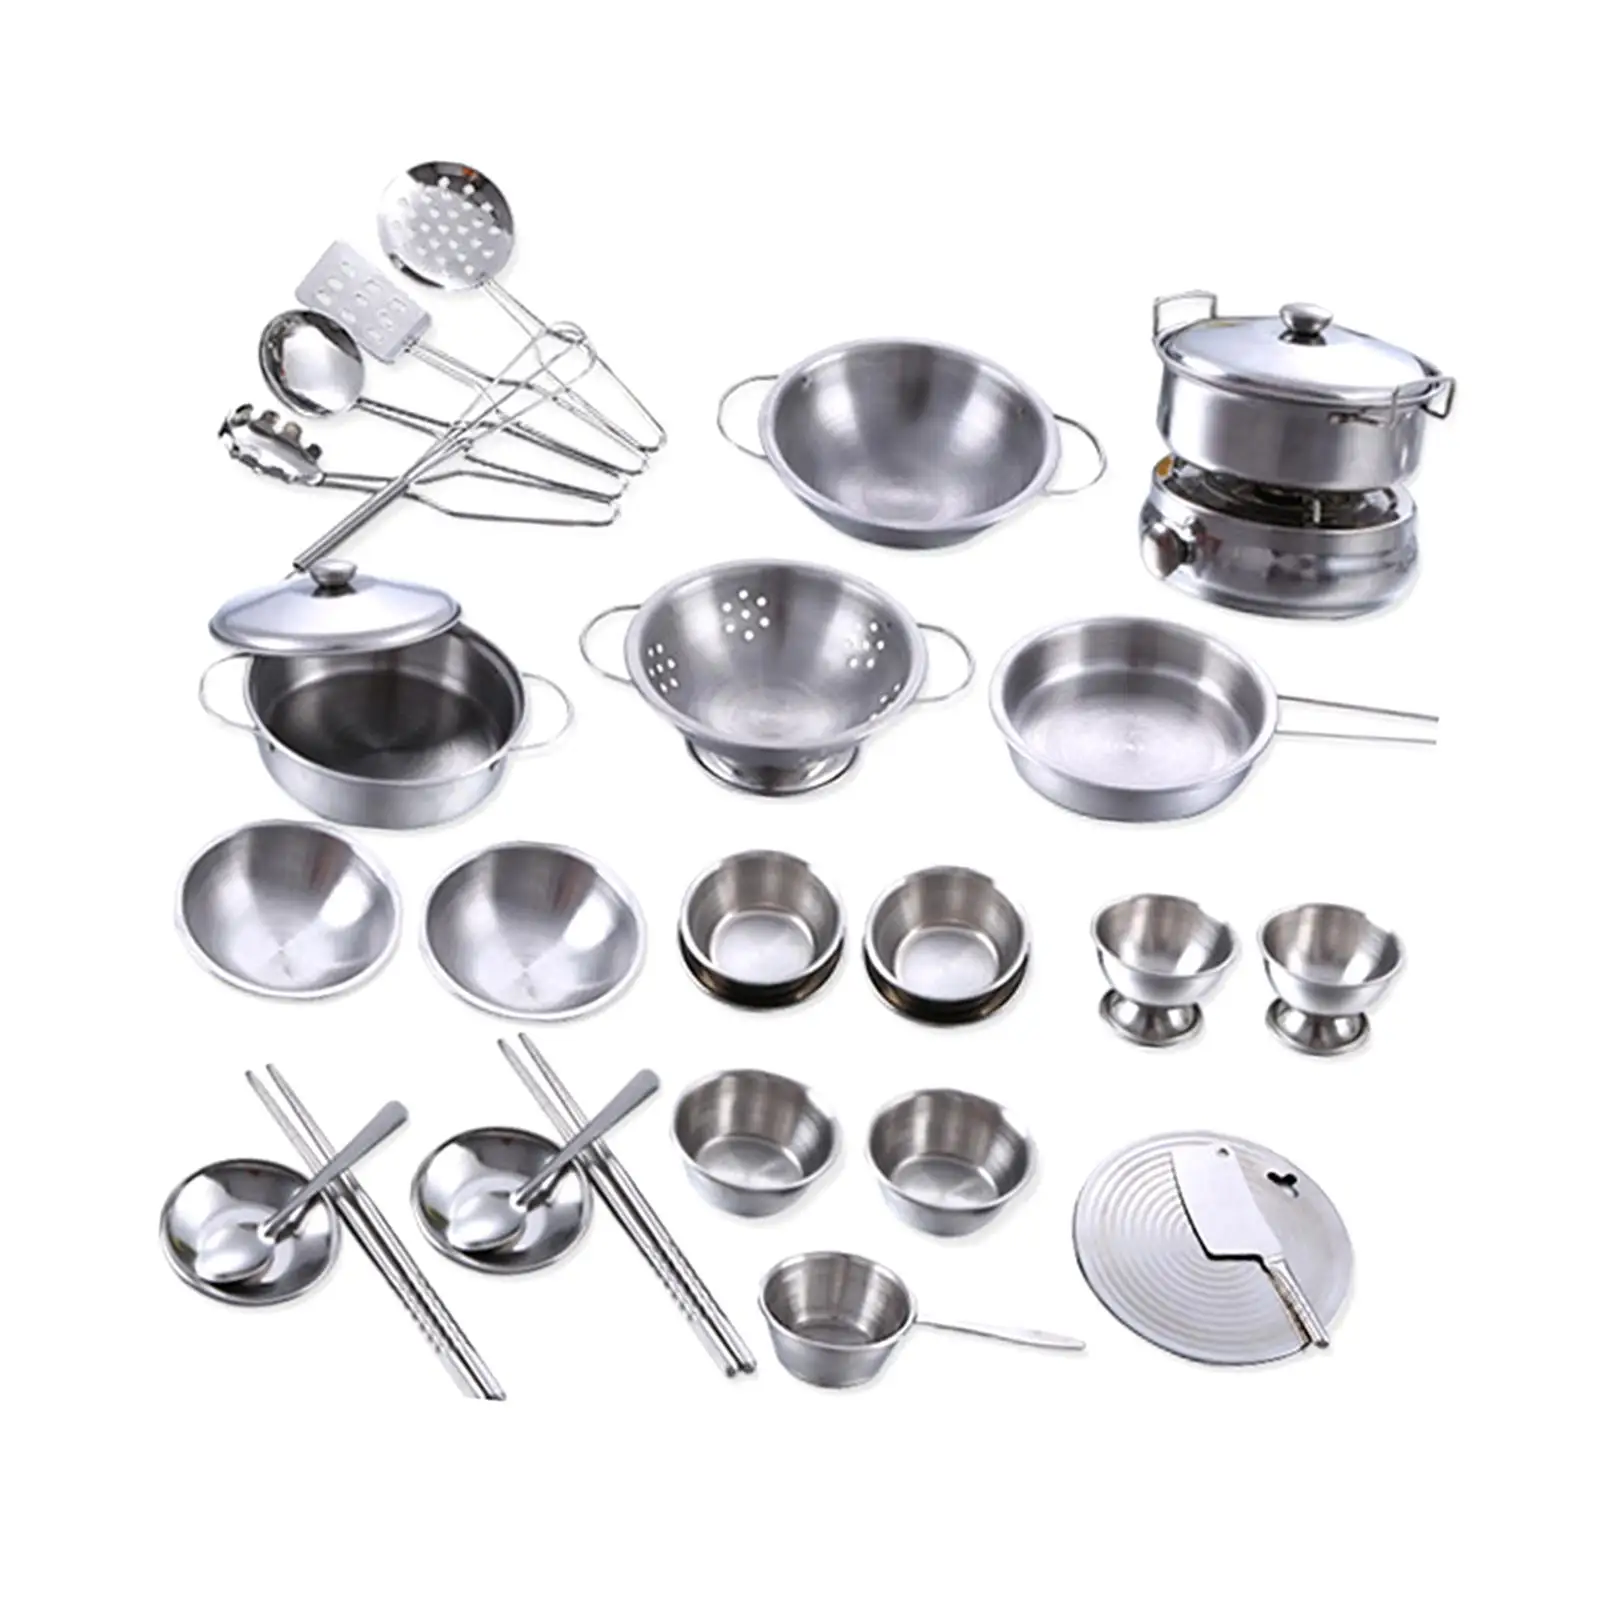 25 Pieces Kids Pretend Play Cookware Set Kitchen Toys Accessories Realistic